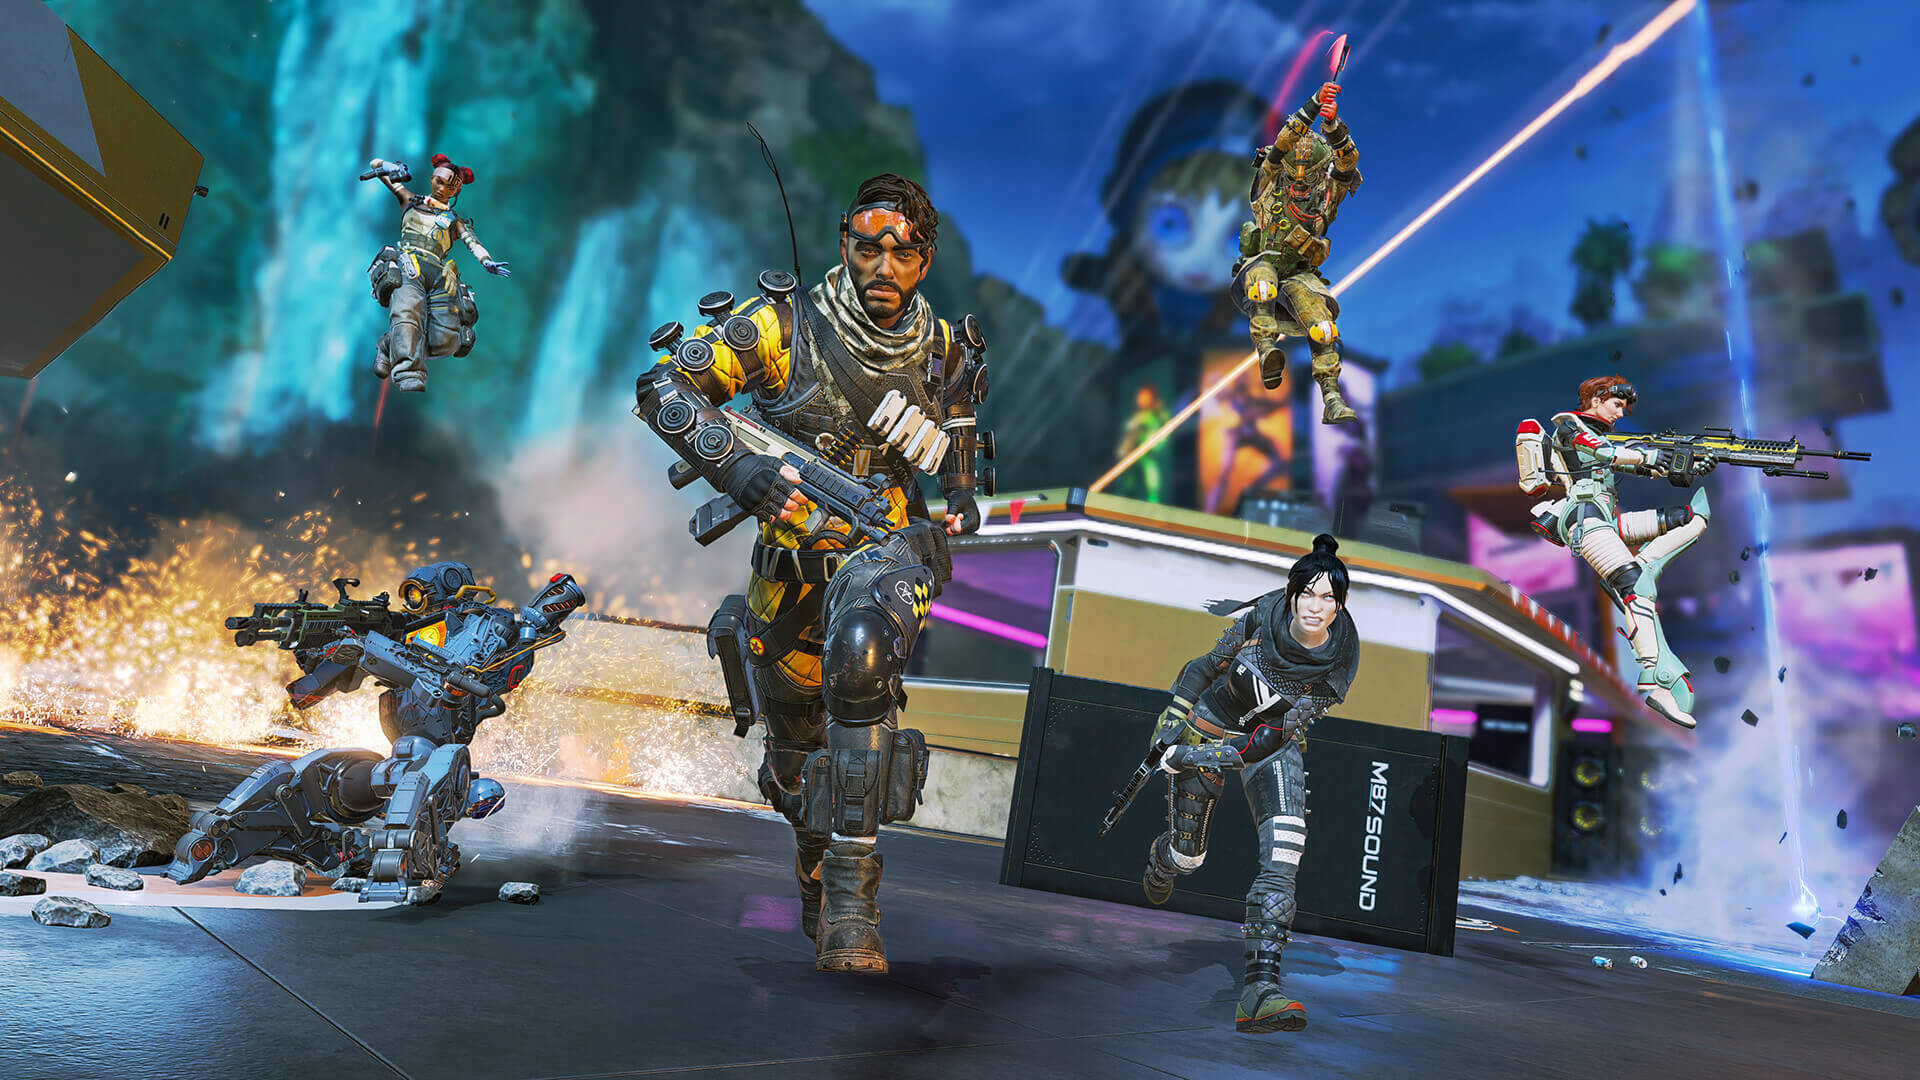 Several of the Legends in Respawn's Apex Legends running towards the camera